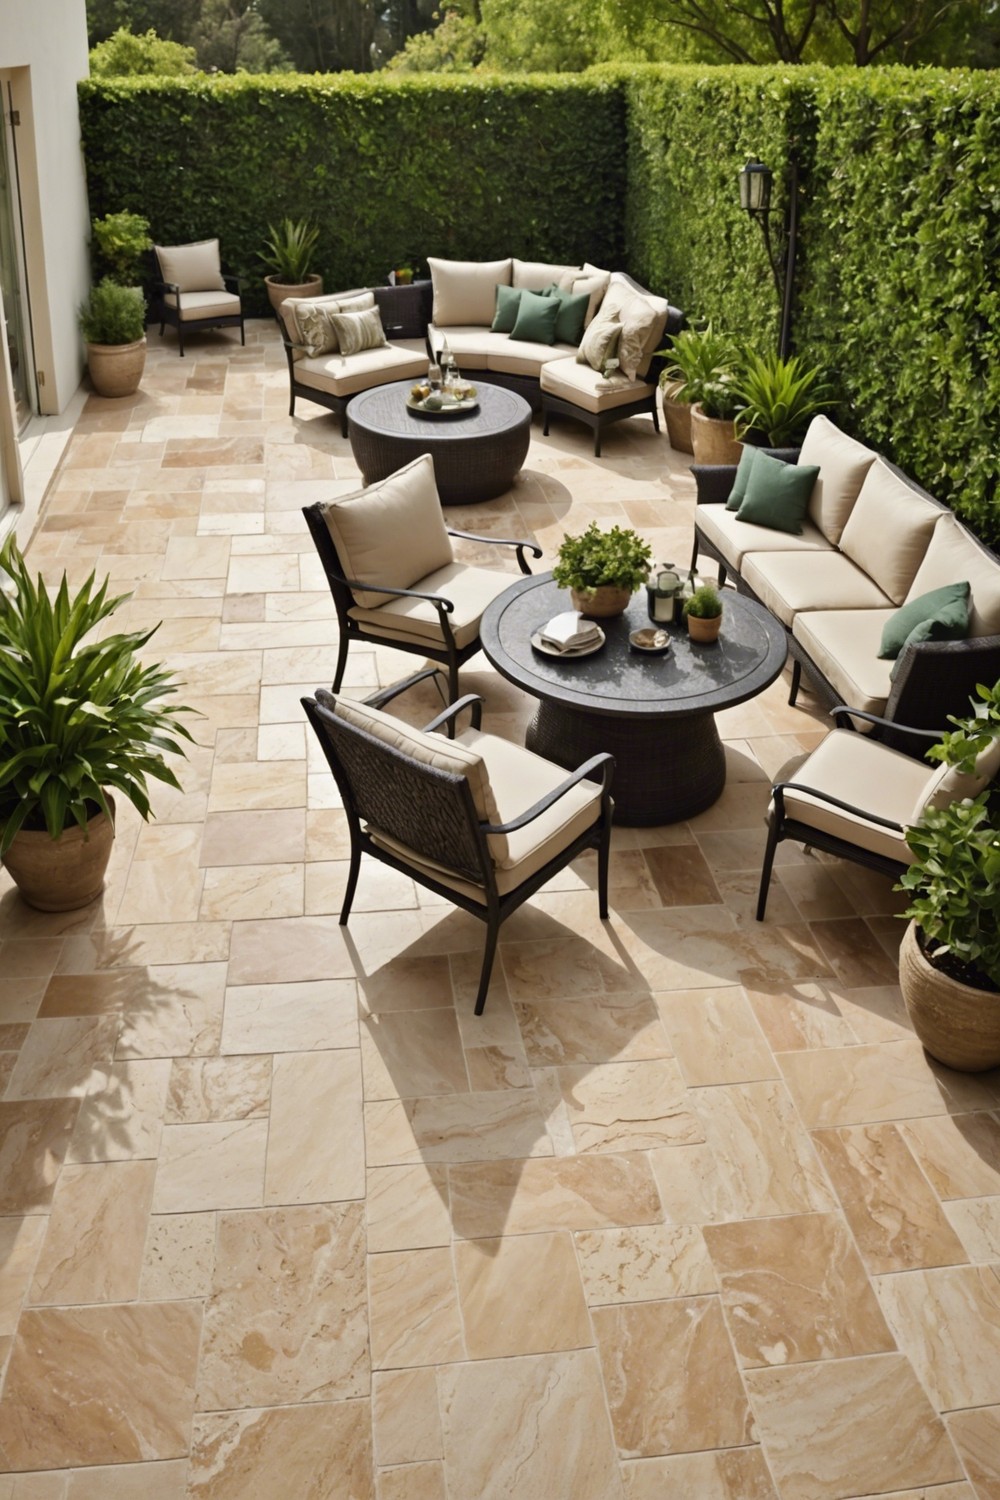 Travertine Tiles for a Luxurious Patio